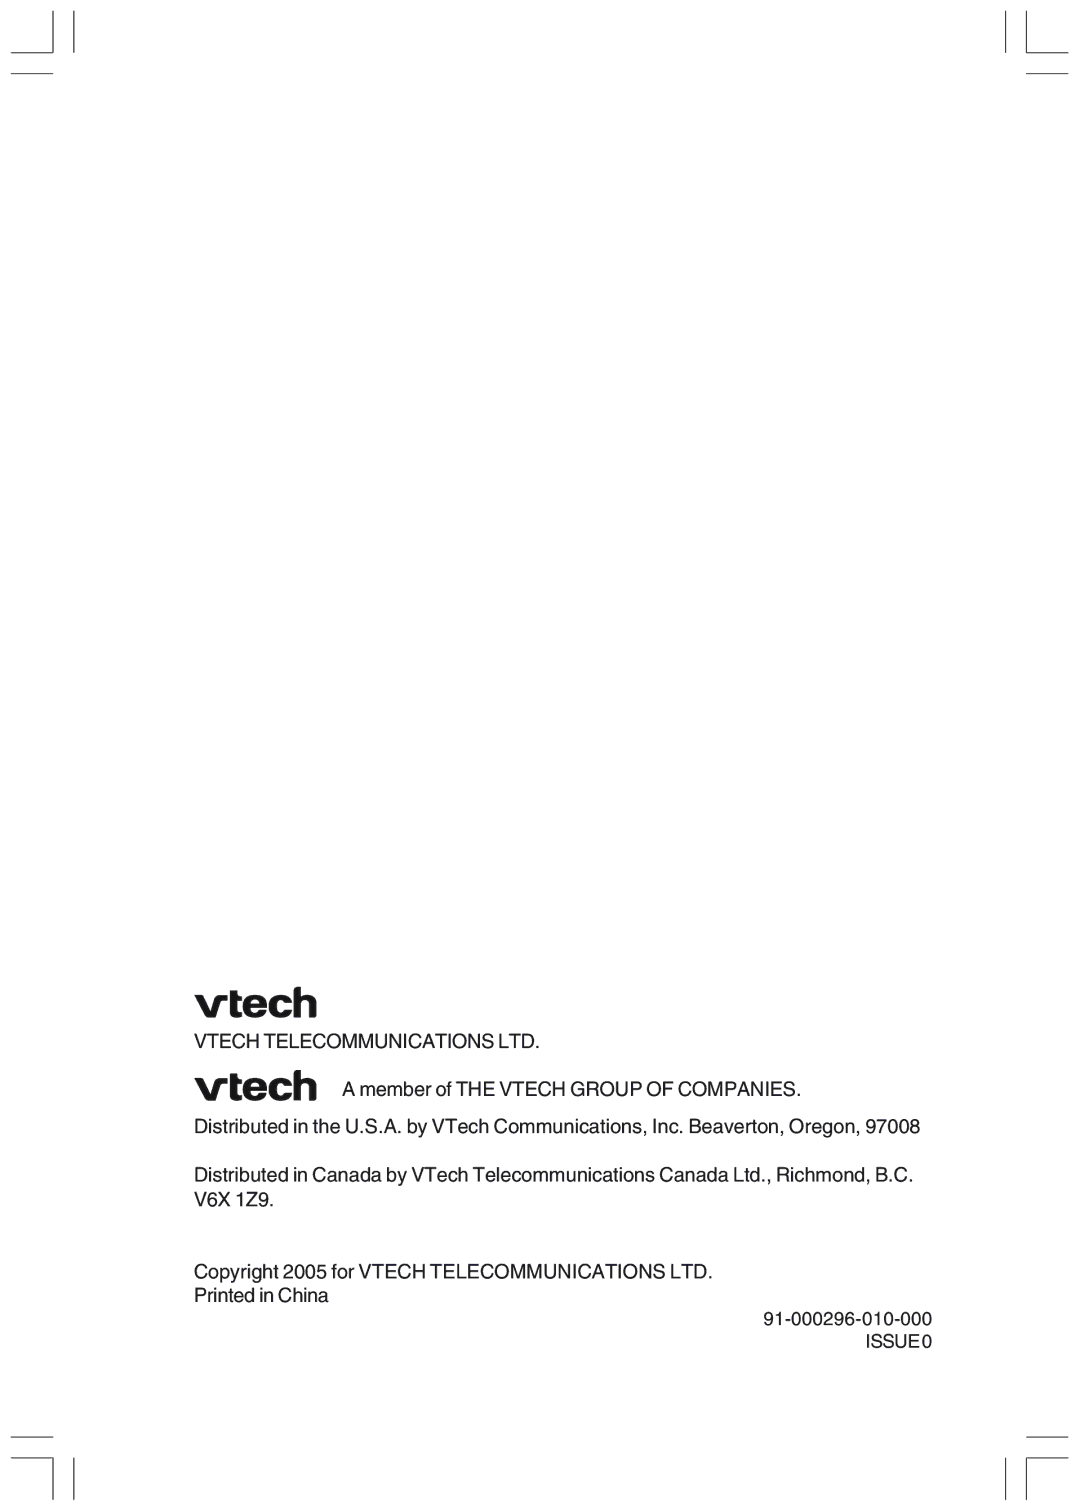 VTech IP 811 manual ISSUE0 